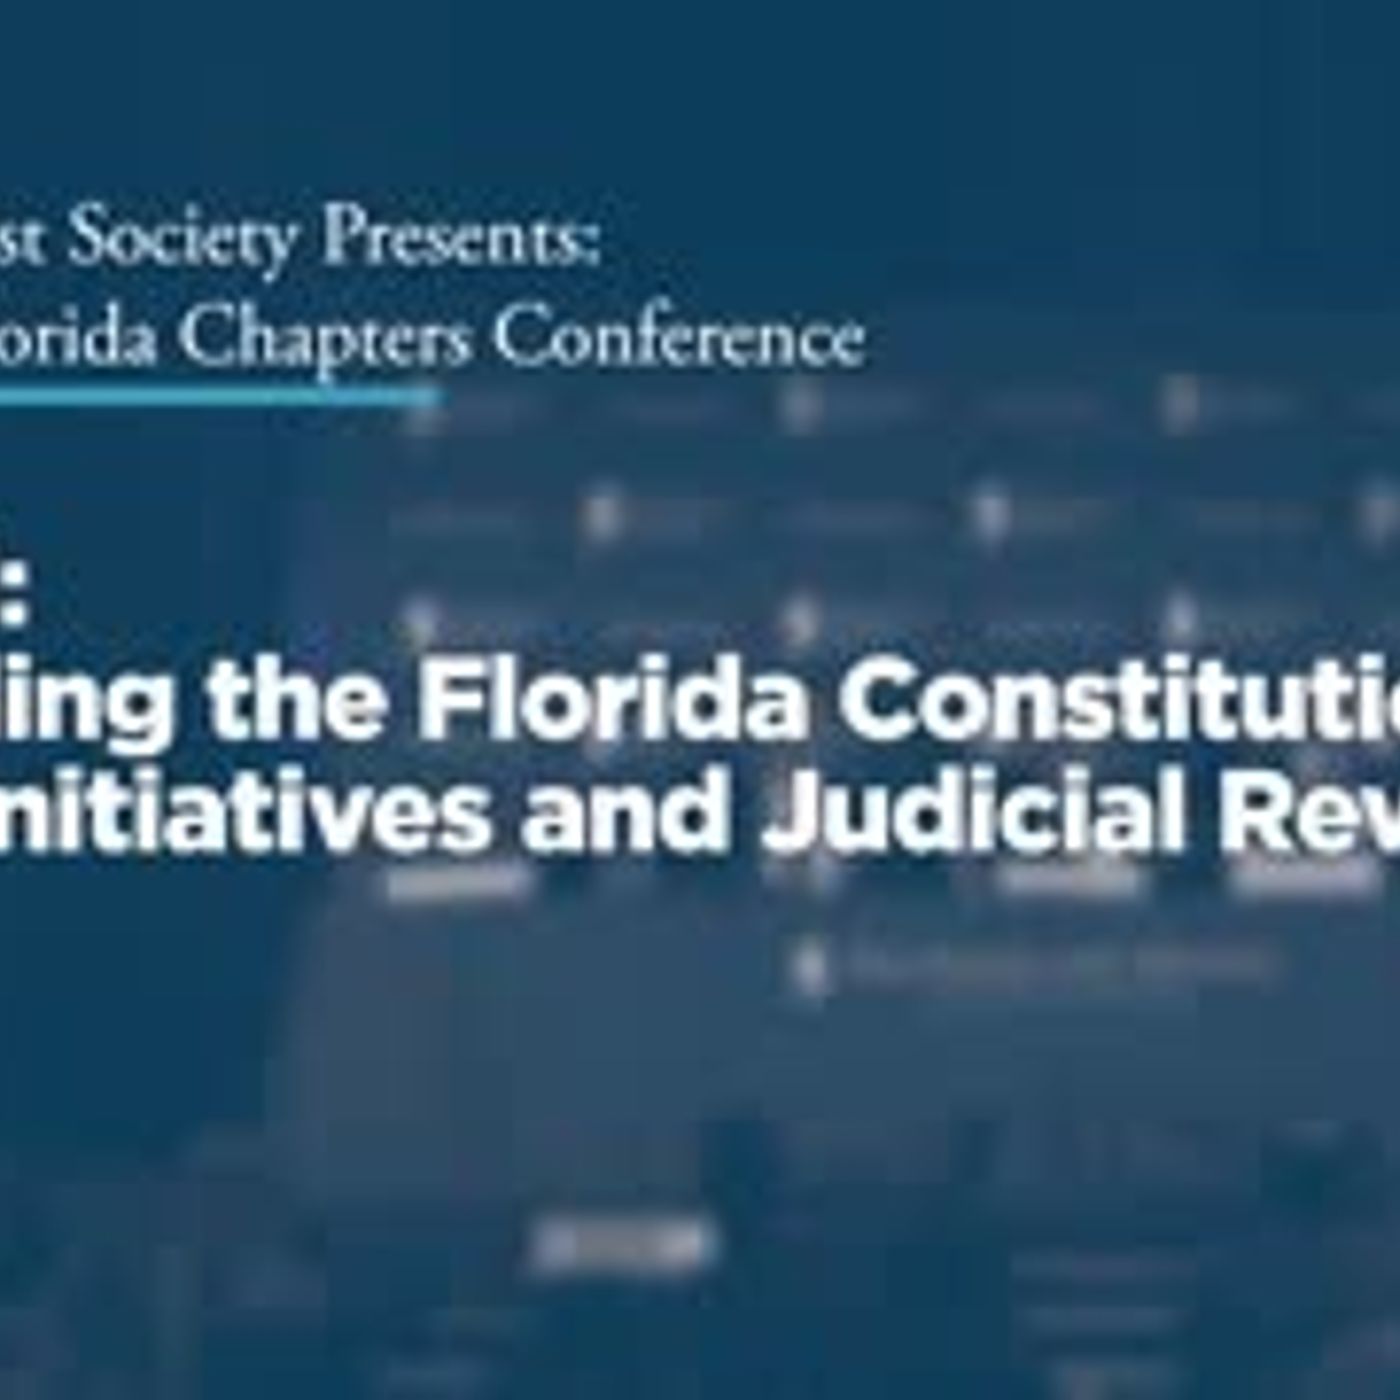 Panel II: Amending the Florida Constitution: Ballot Initiatives and Judicial Review